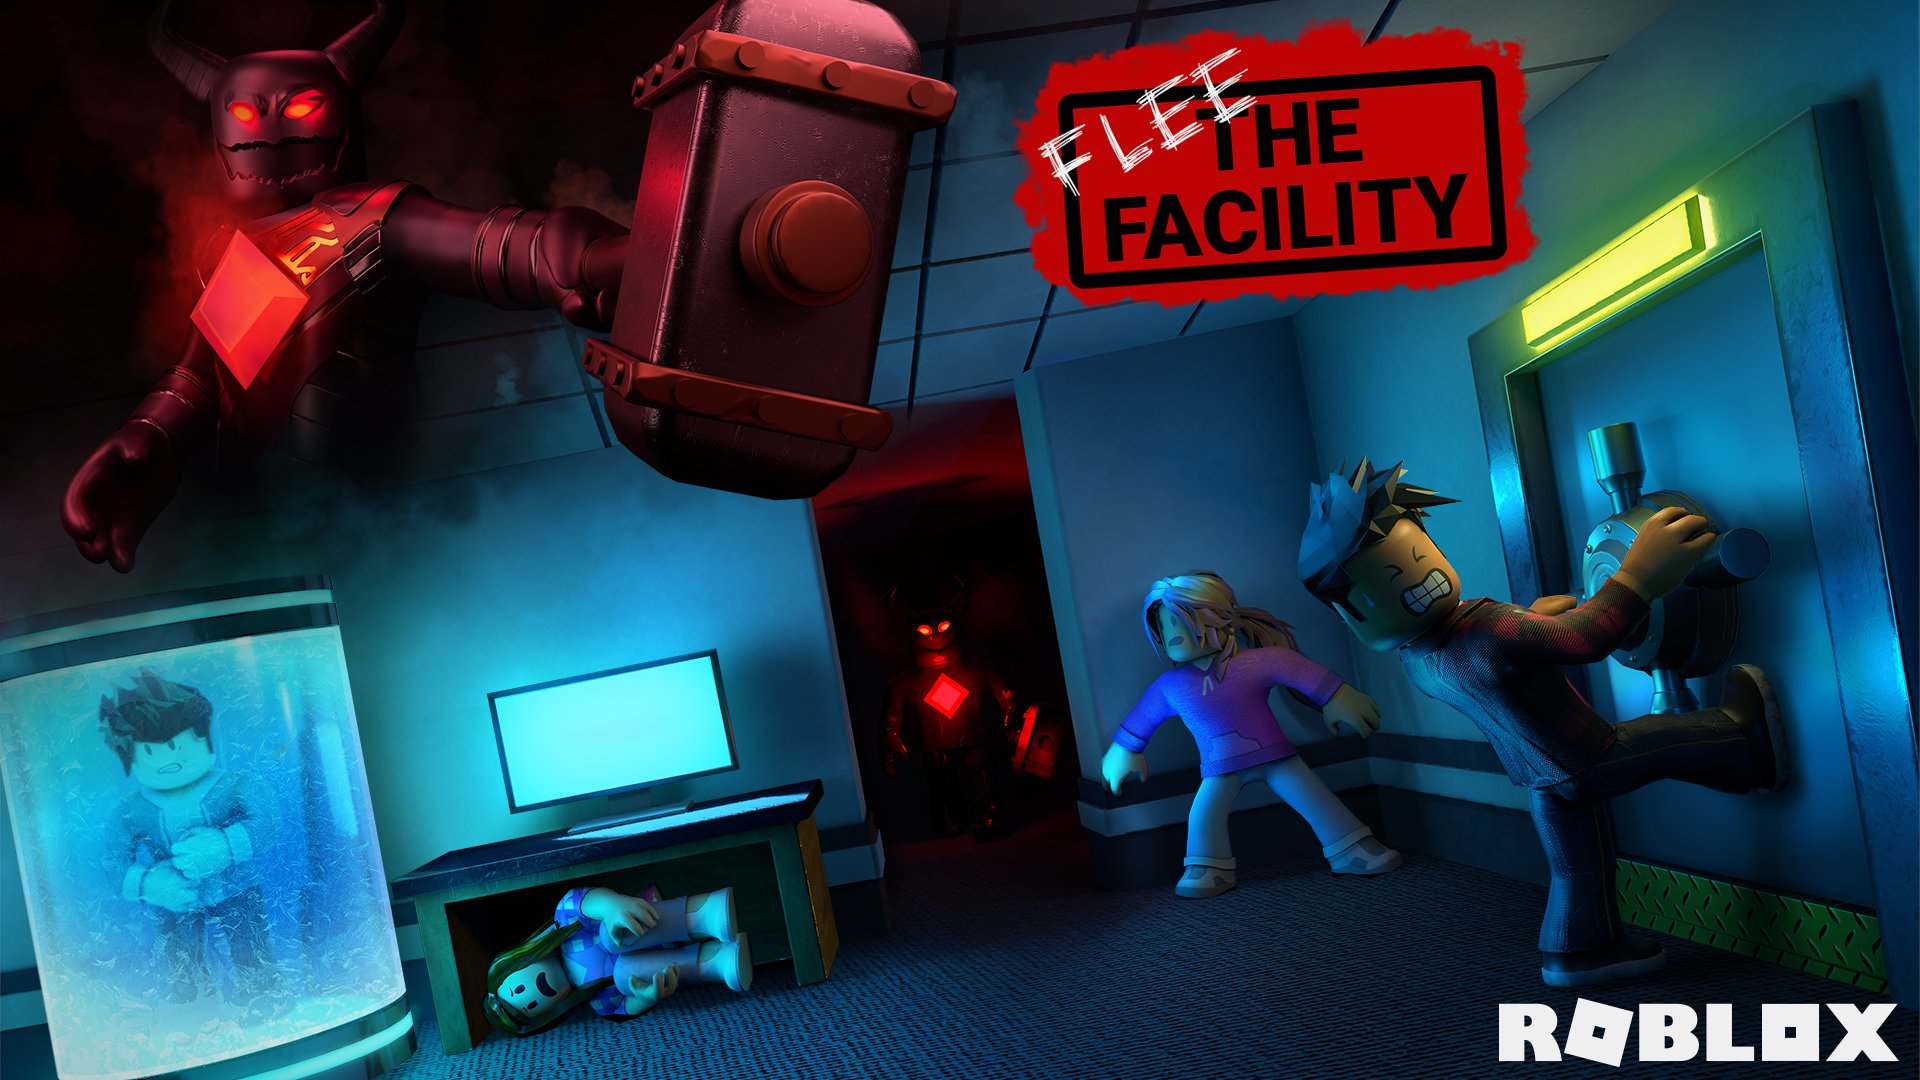 Andrew Mrwindy Willeitner On Twitter Just Uploaded Flee The Facility S Epic New Thumbnail Thanks Roblox For The Render - amplify roblox